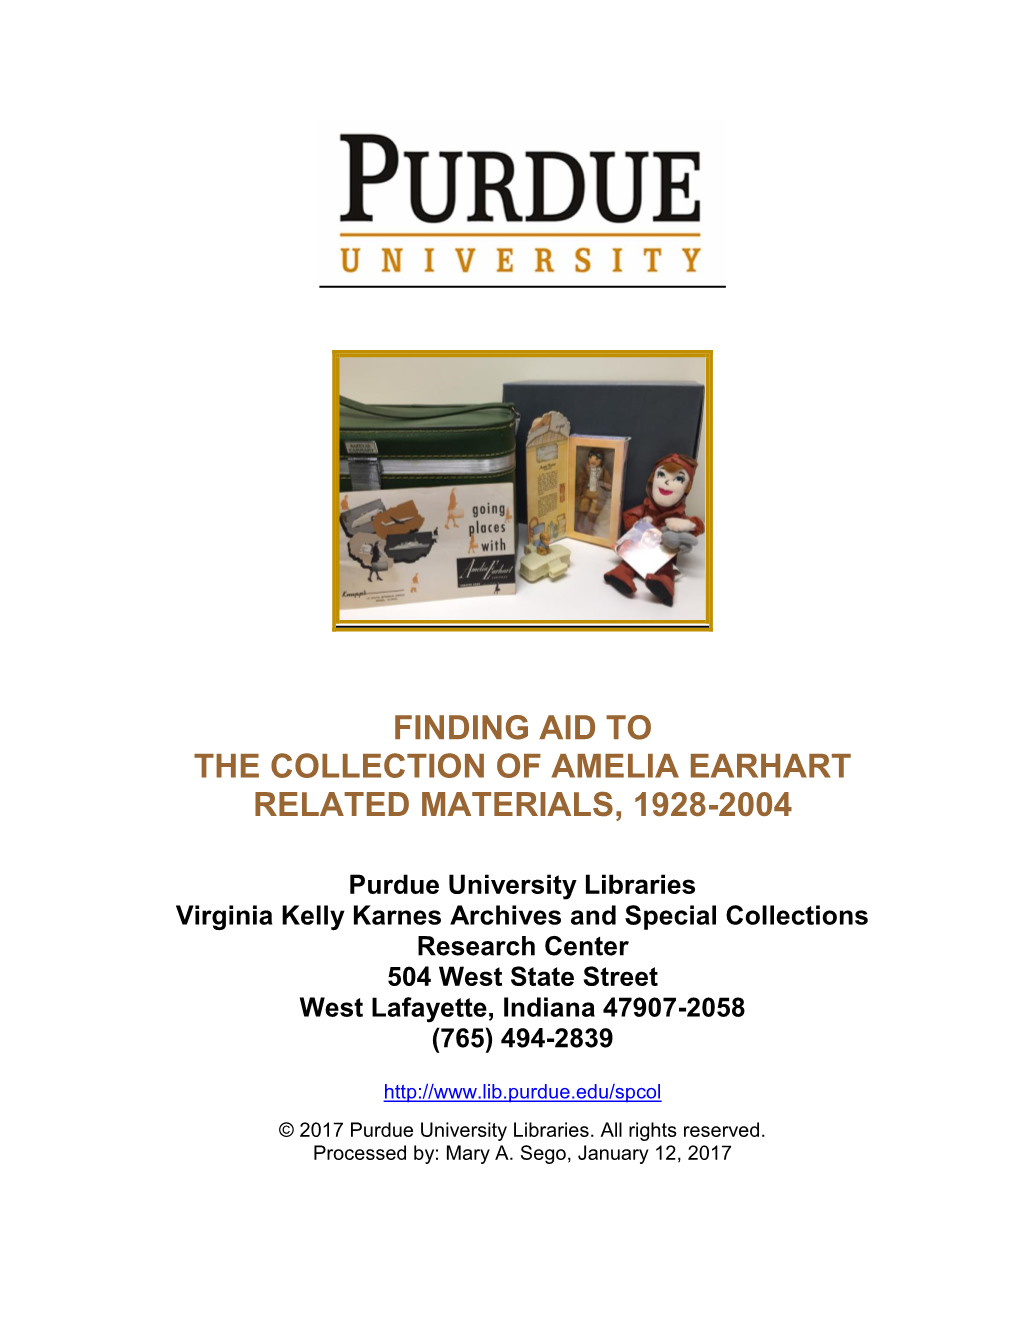 Finding Aid to the Collection of Amelia Earhart Related Materials, 1928-2004